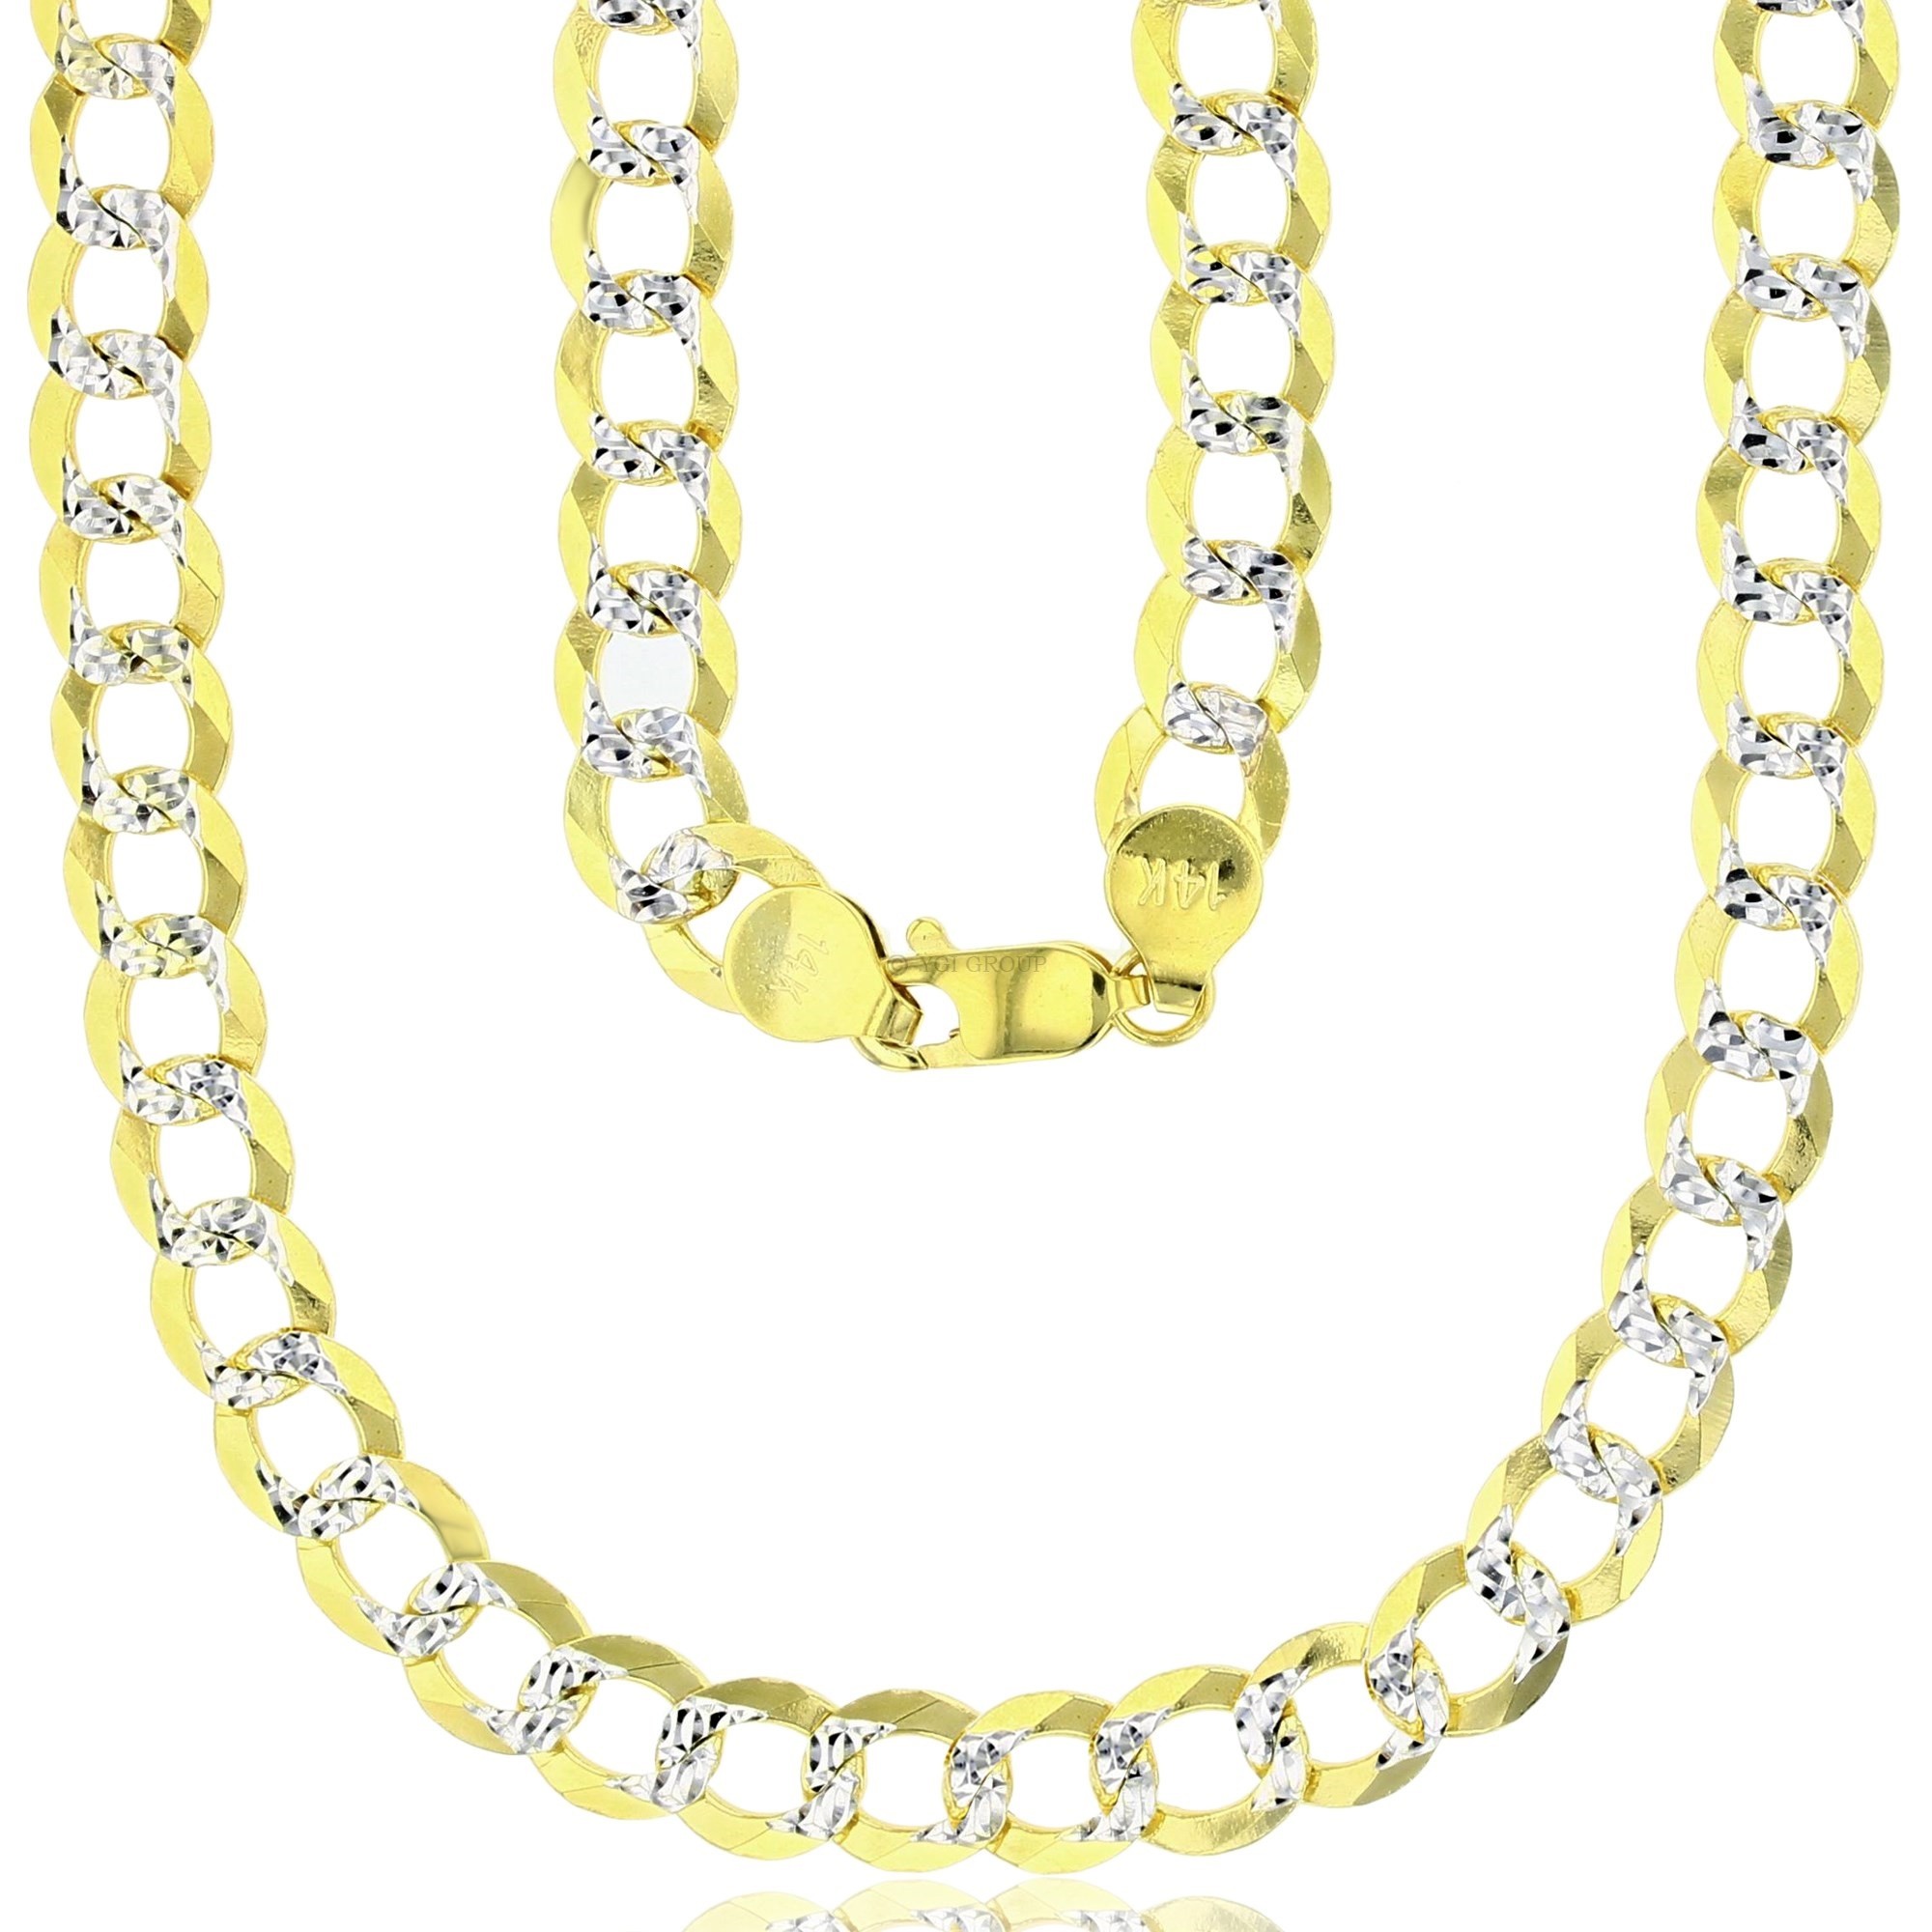 14K Gold 22" Two Tone Cuban Pave 180 Gauge 7mm Chain